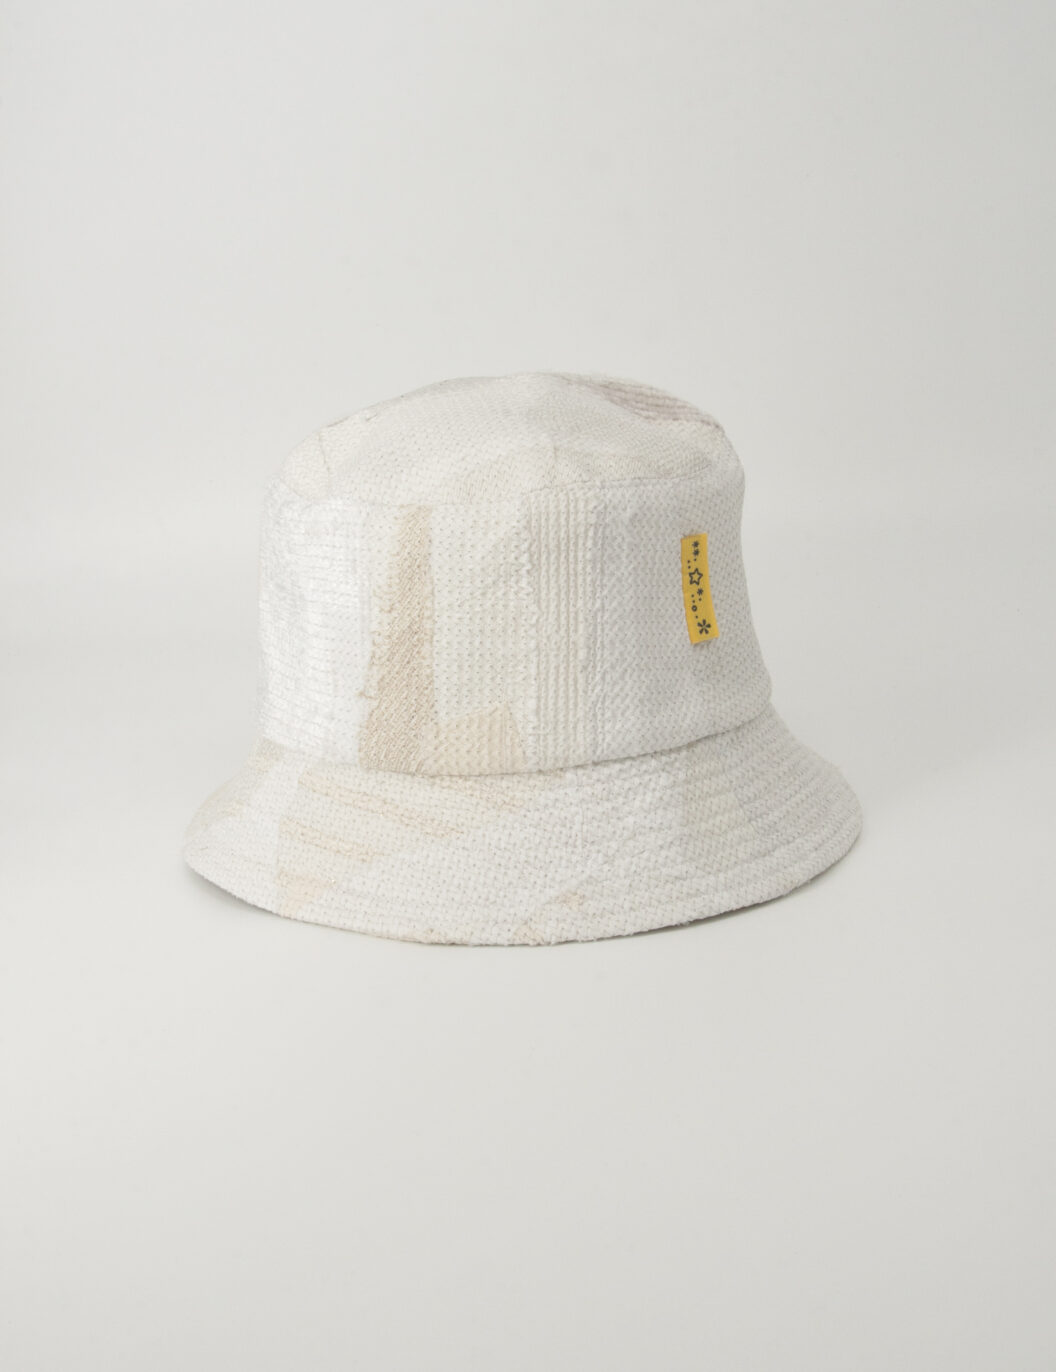 This is an image of a white scrap bucket hat which was made from white fabric waste.